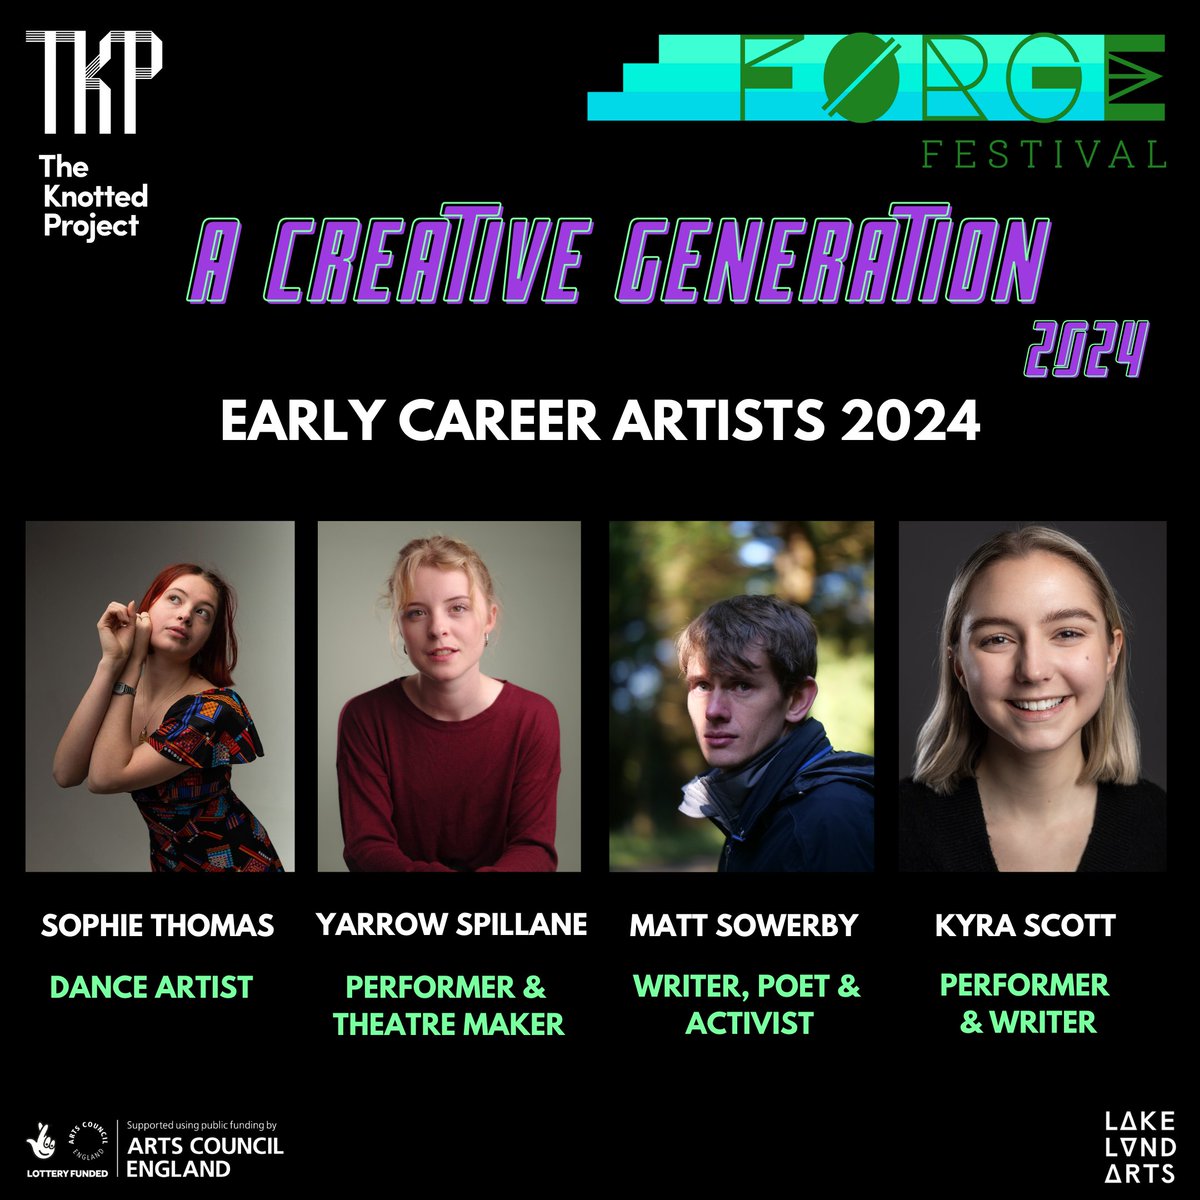 MEET OUR #ForgeFestival24 EARLY CAREER ARTISTS! We are so excited to be working with these 4 talented Early Career Artists who will each create an original solo performance for the festival, with support from team TKP! Here’s what they have to say about being involved...